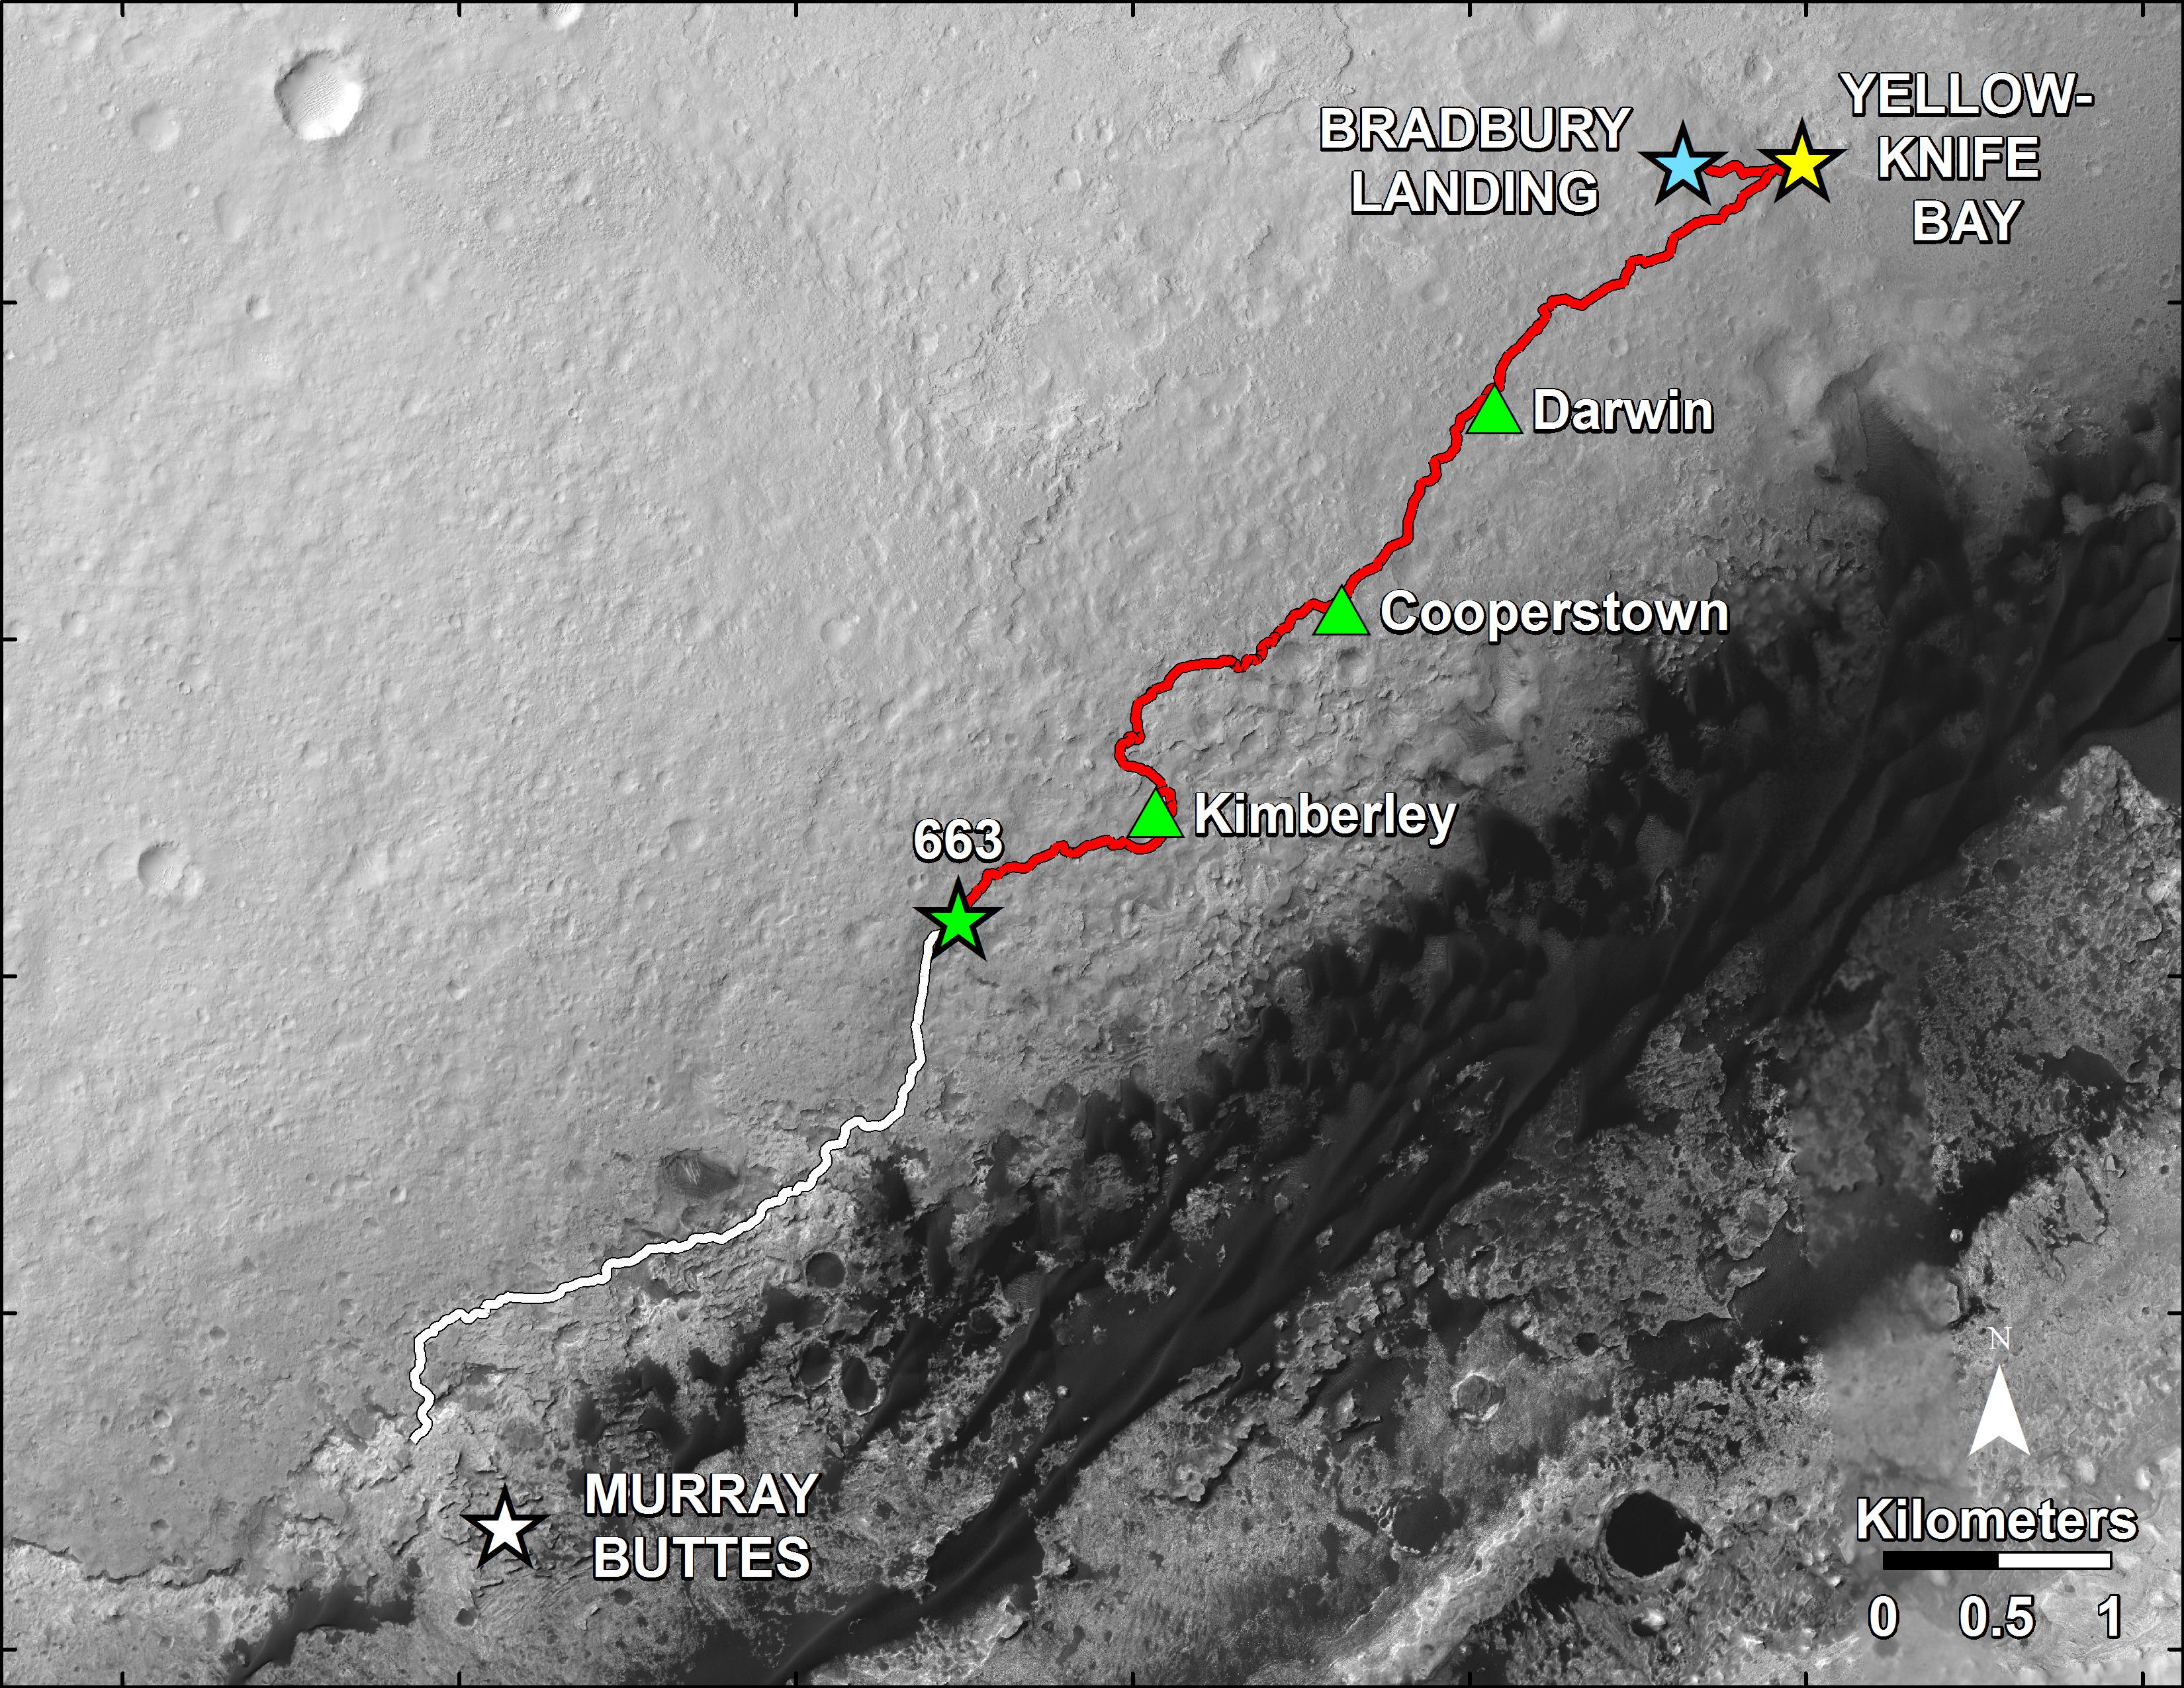 This map shows in red the route driven by NASA's Curiosity Mars rover from the "Bradbury Landing" location where it landed in August 2012 (blue star at upper right) to complete its first Martian year on Sol 669. The white line shows the planned route ahead.  Image Credit: NASA/JPL